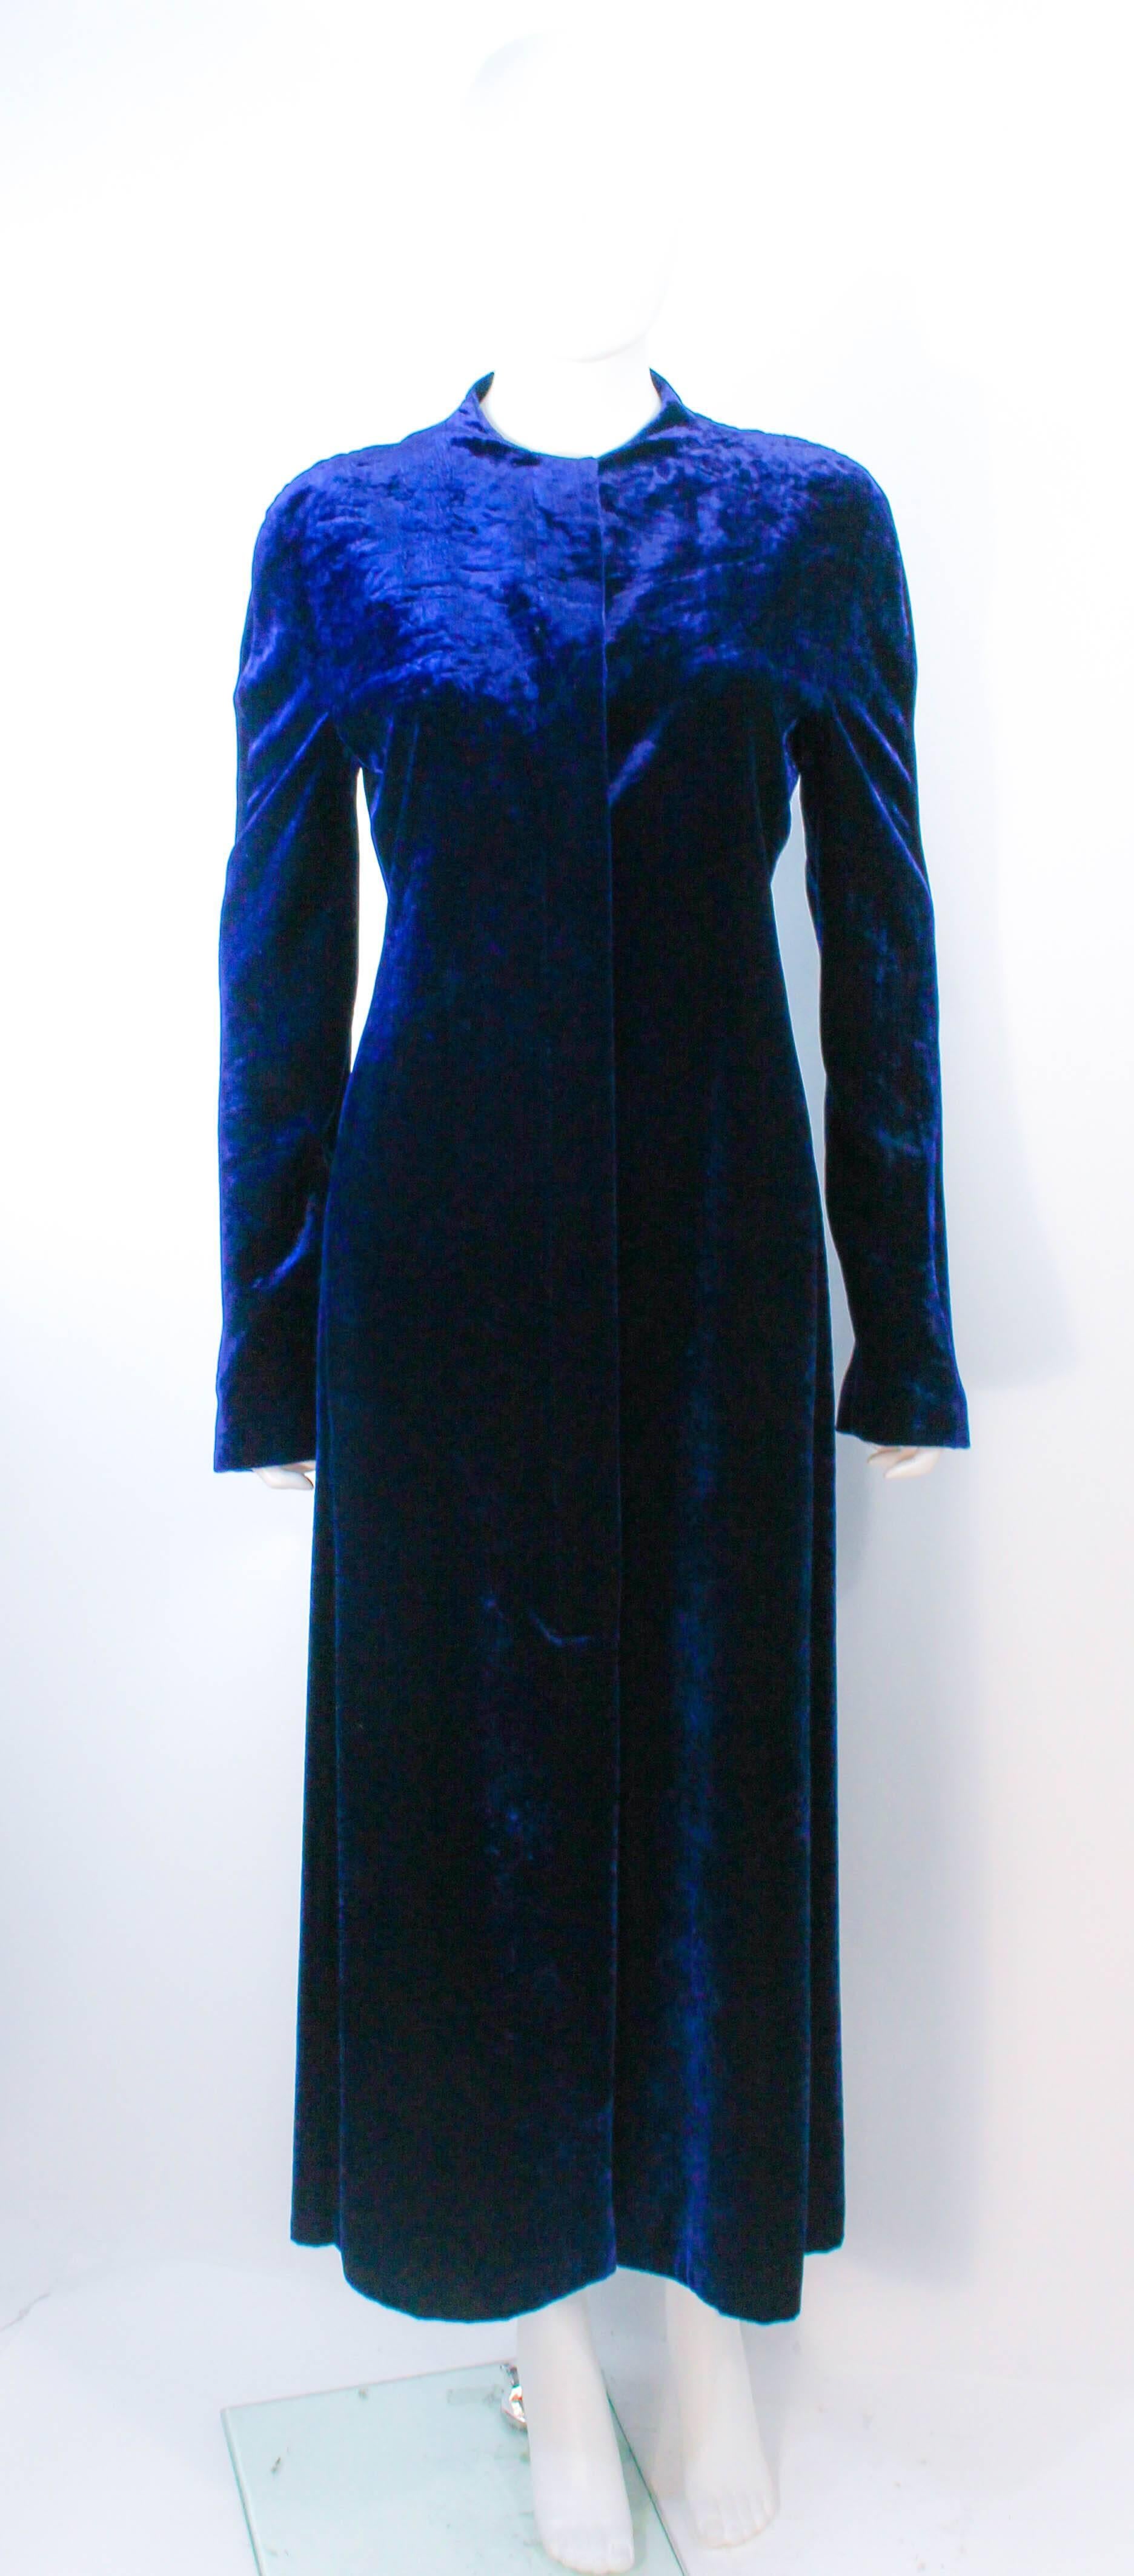 This Krizia design is composed of a rich royal midnight blue velvet (silk/viscose blend). Features center front buttons with side pockets. In excellent vintage condition.

**Please cross-reference measurements for personal accuracy. Size in